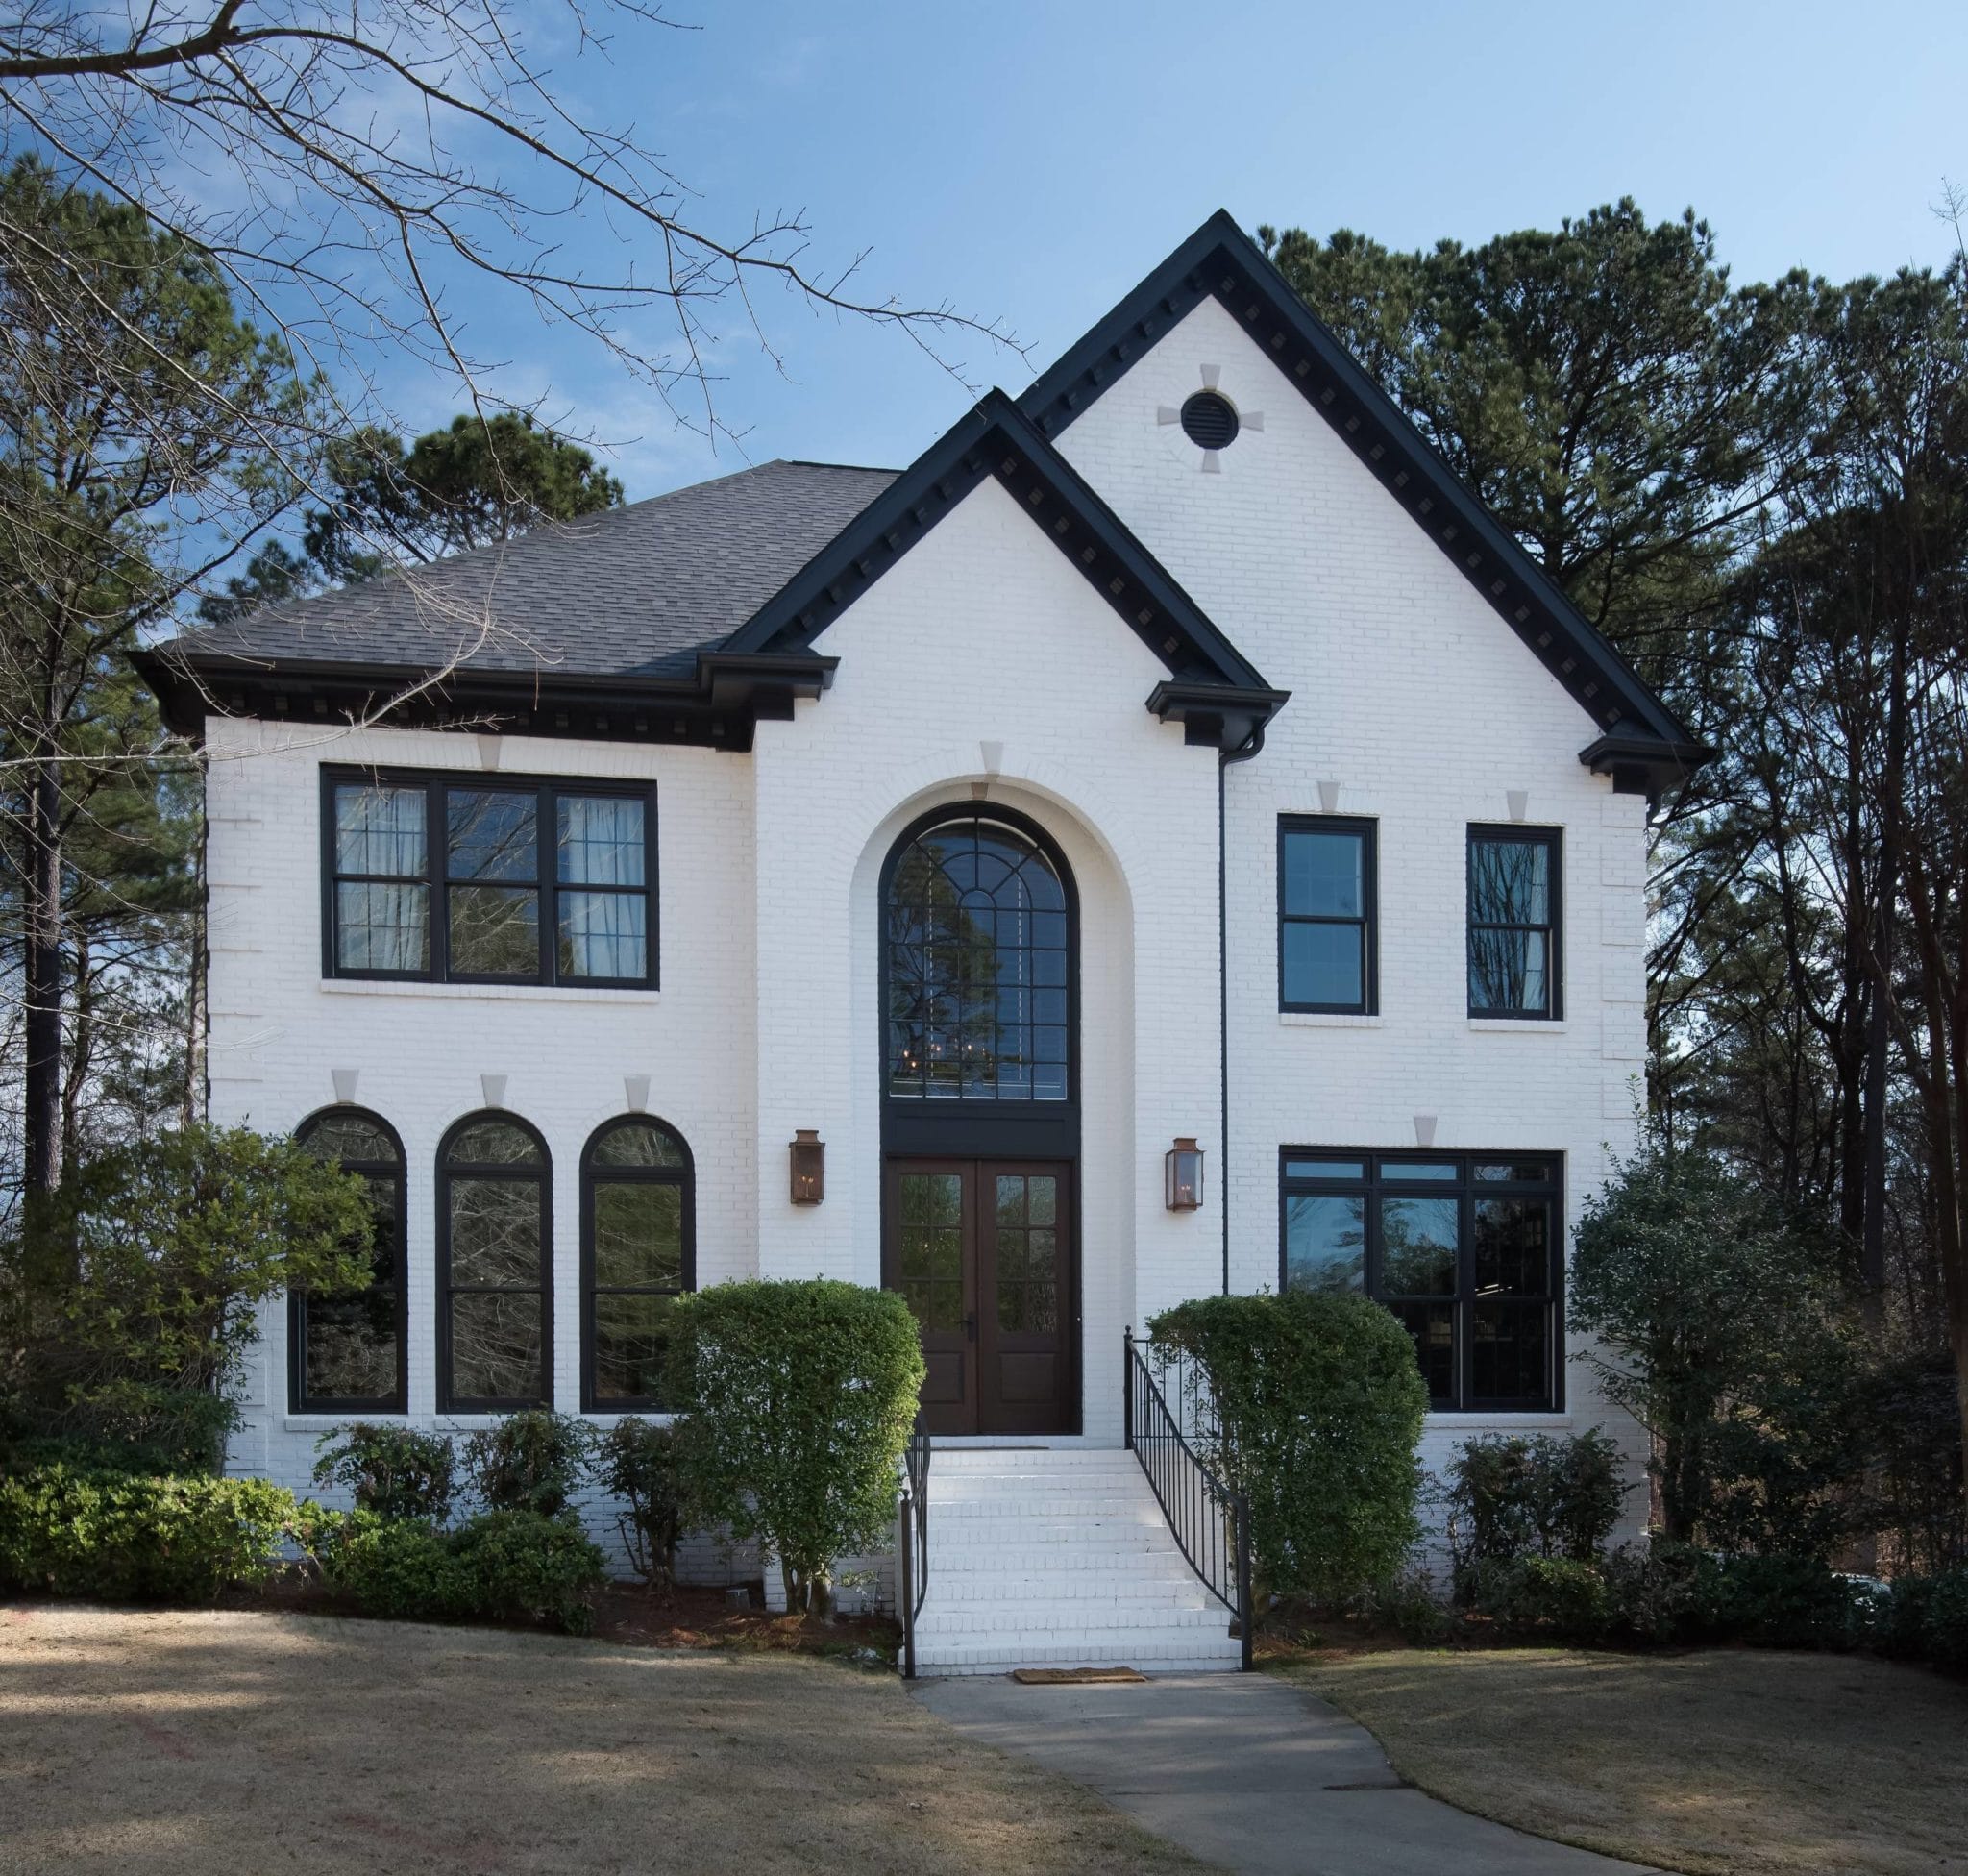 tall two story custom built white home with black accents